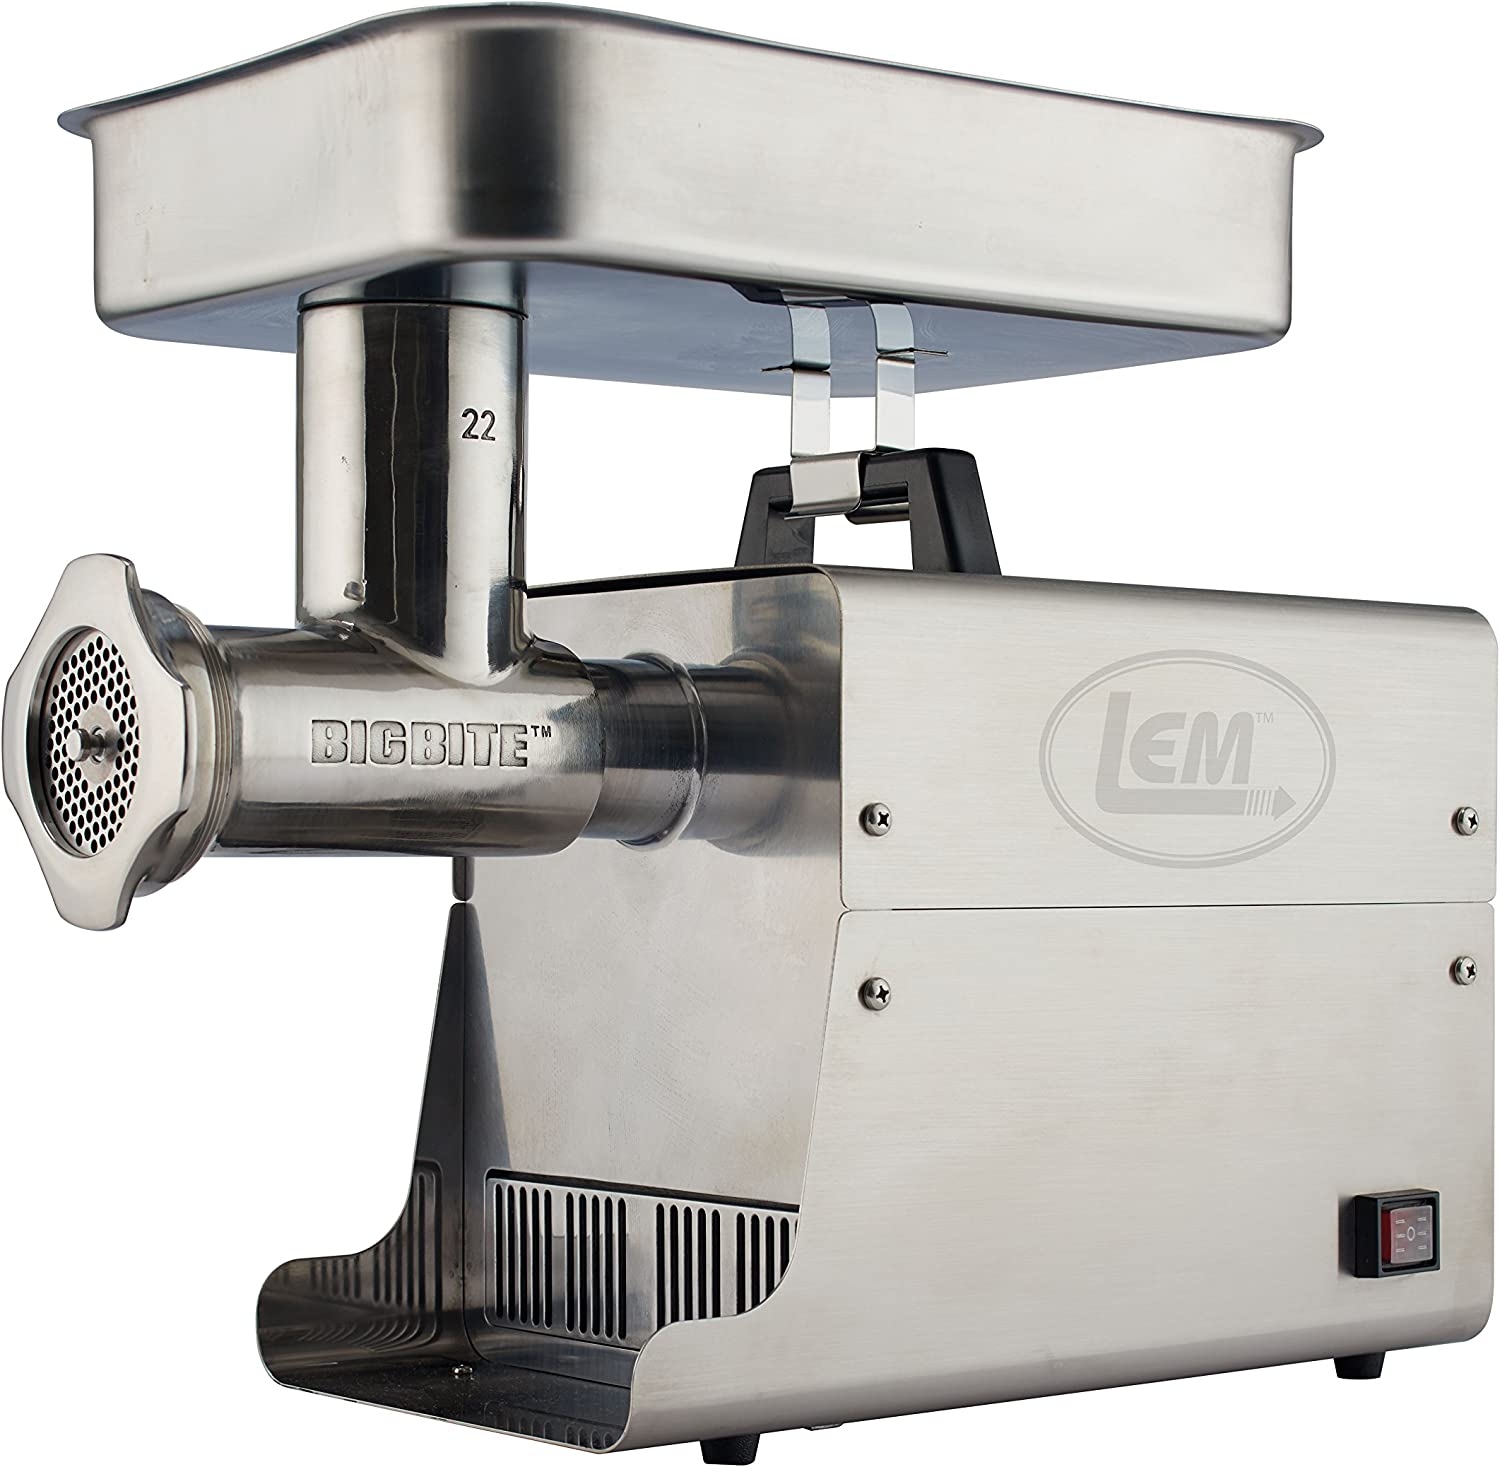 LEM Products Stainless Steel Big Bite Electric Meat Grinder Import To Shop ×Product customization General Description Gallery